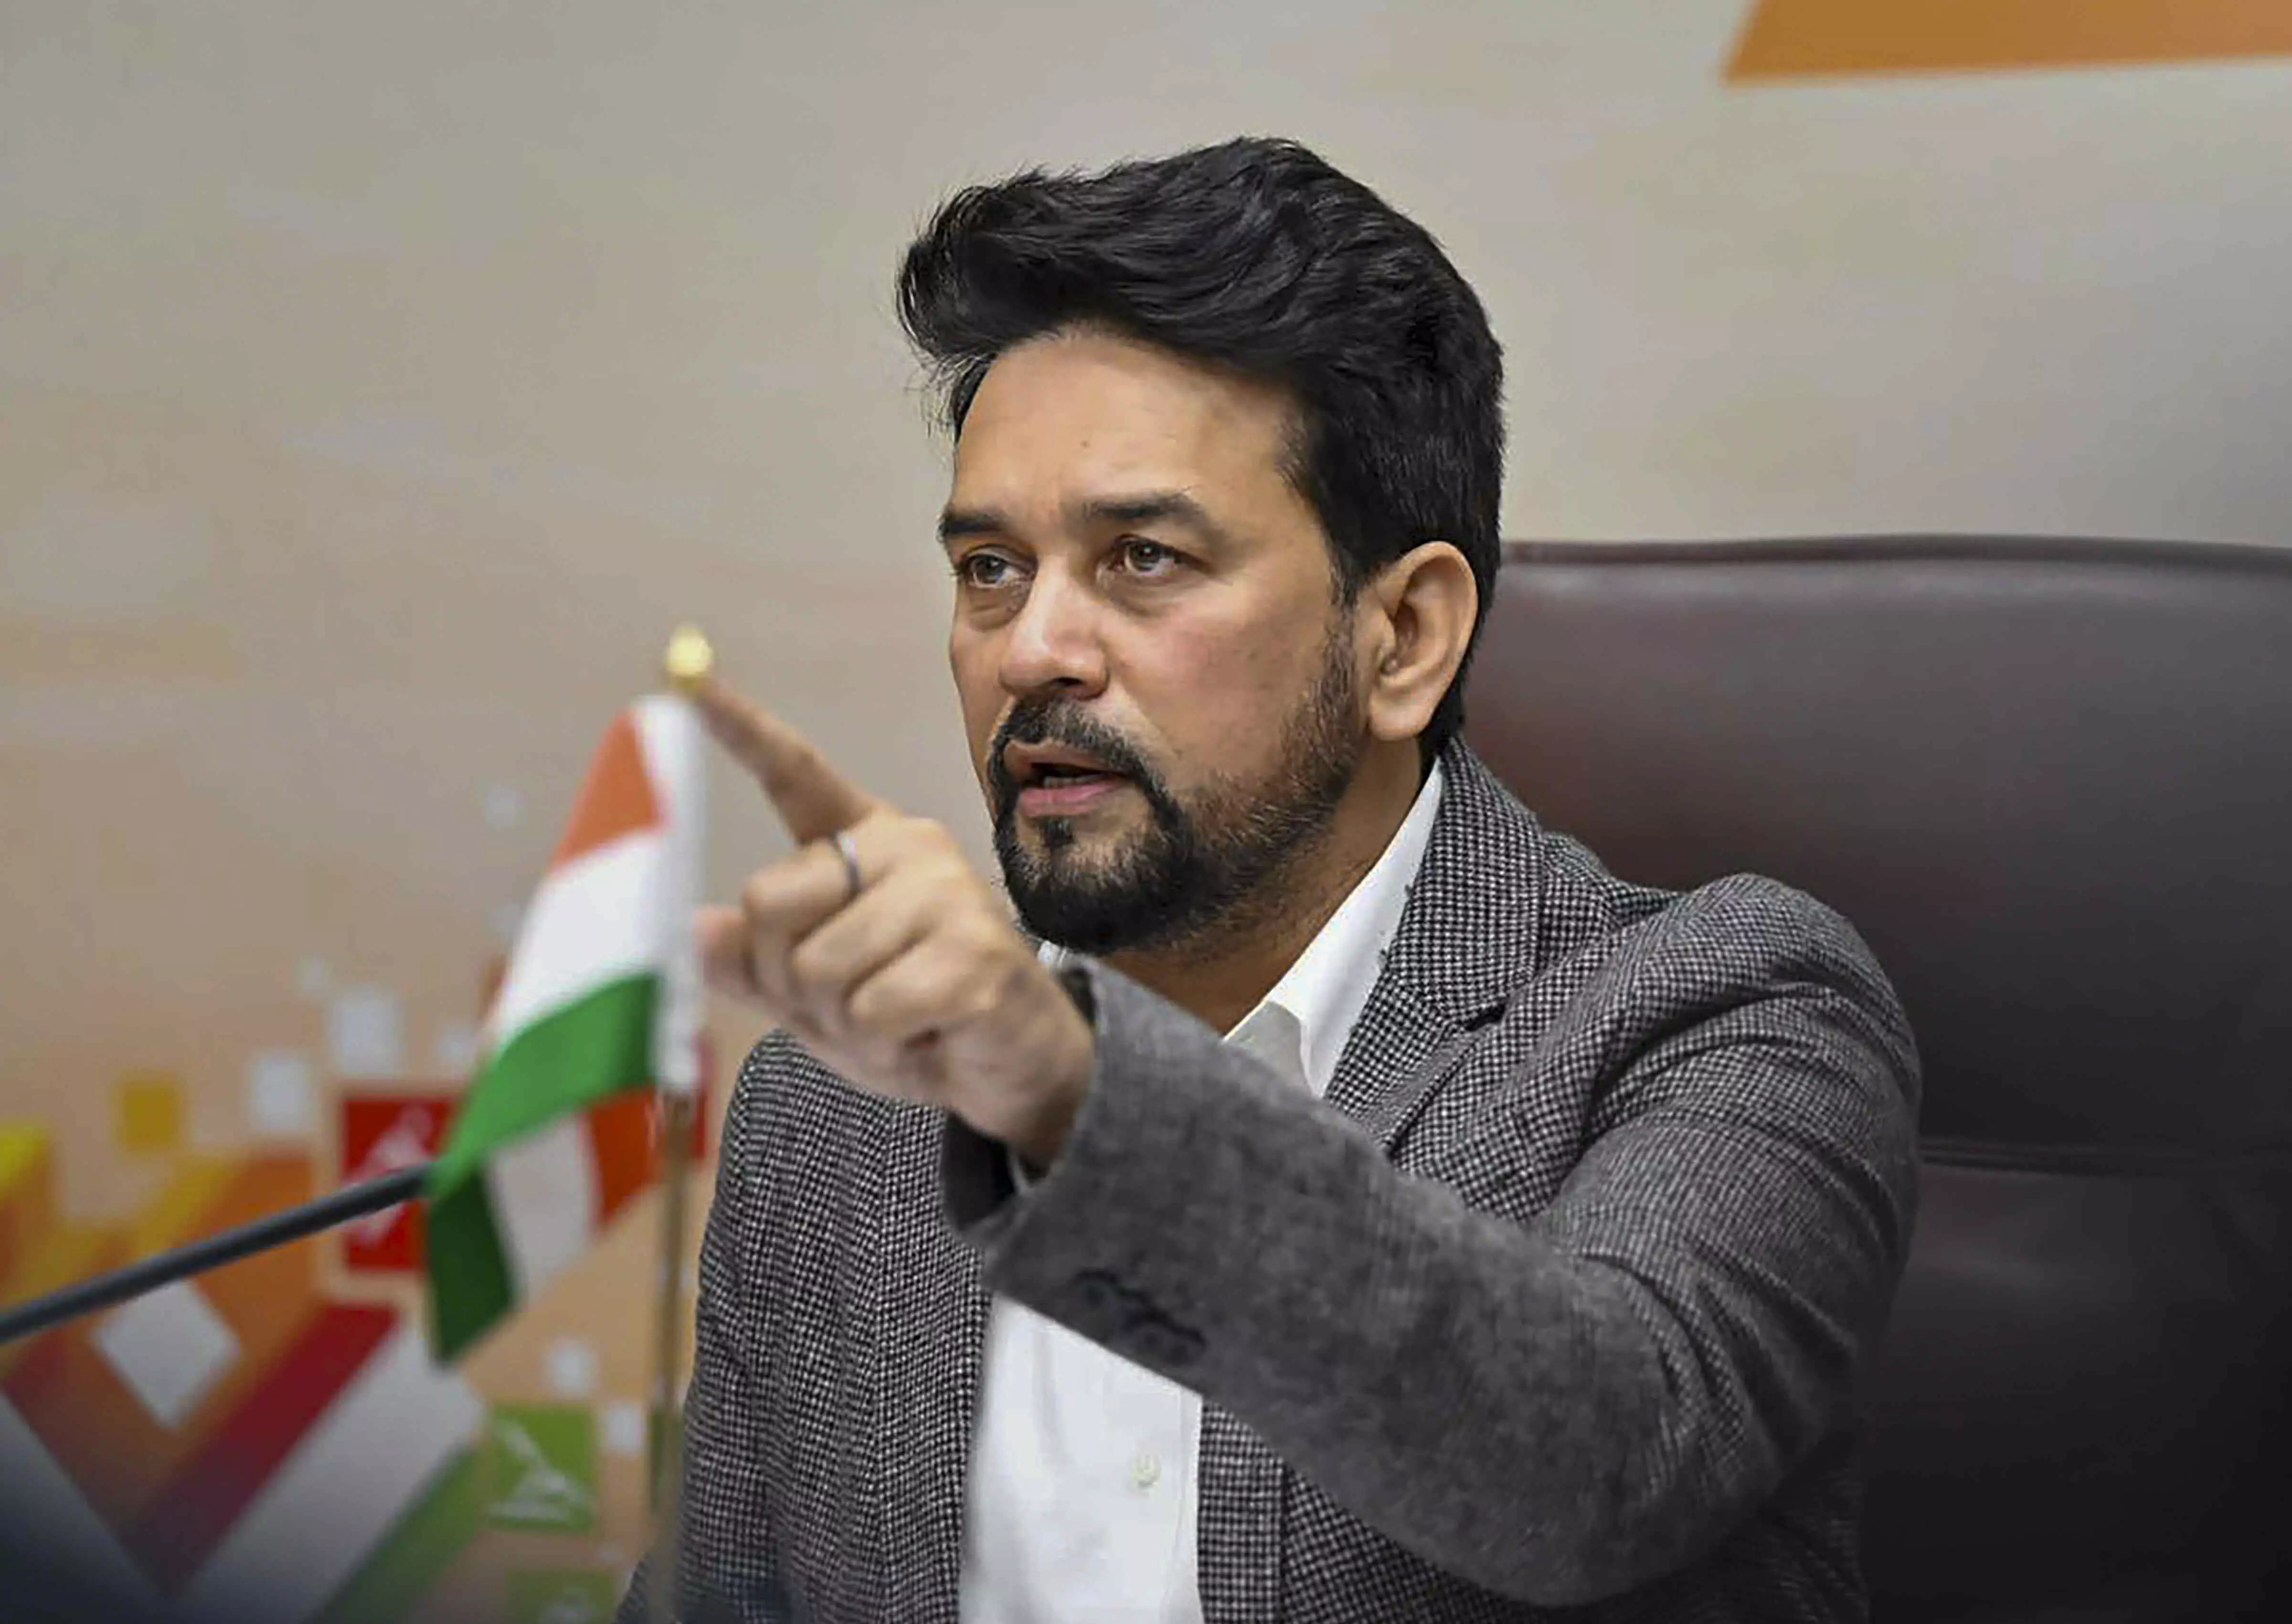 Why is Rahul running scared from Delhi Police, asks Union minister Anurag Thakur